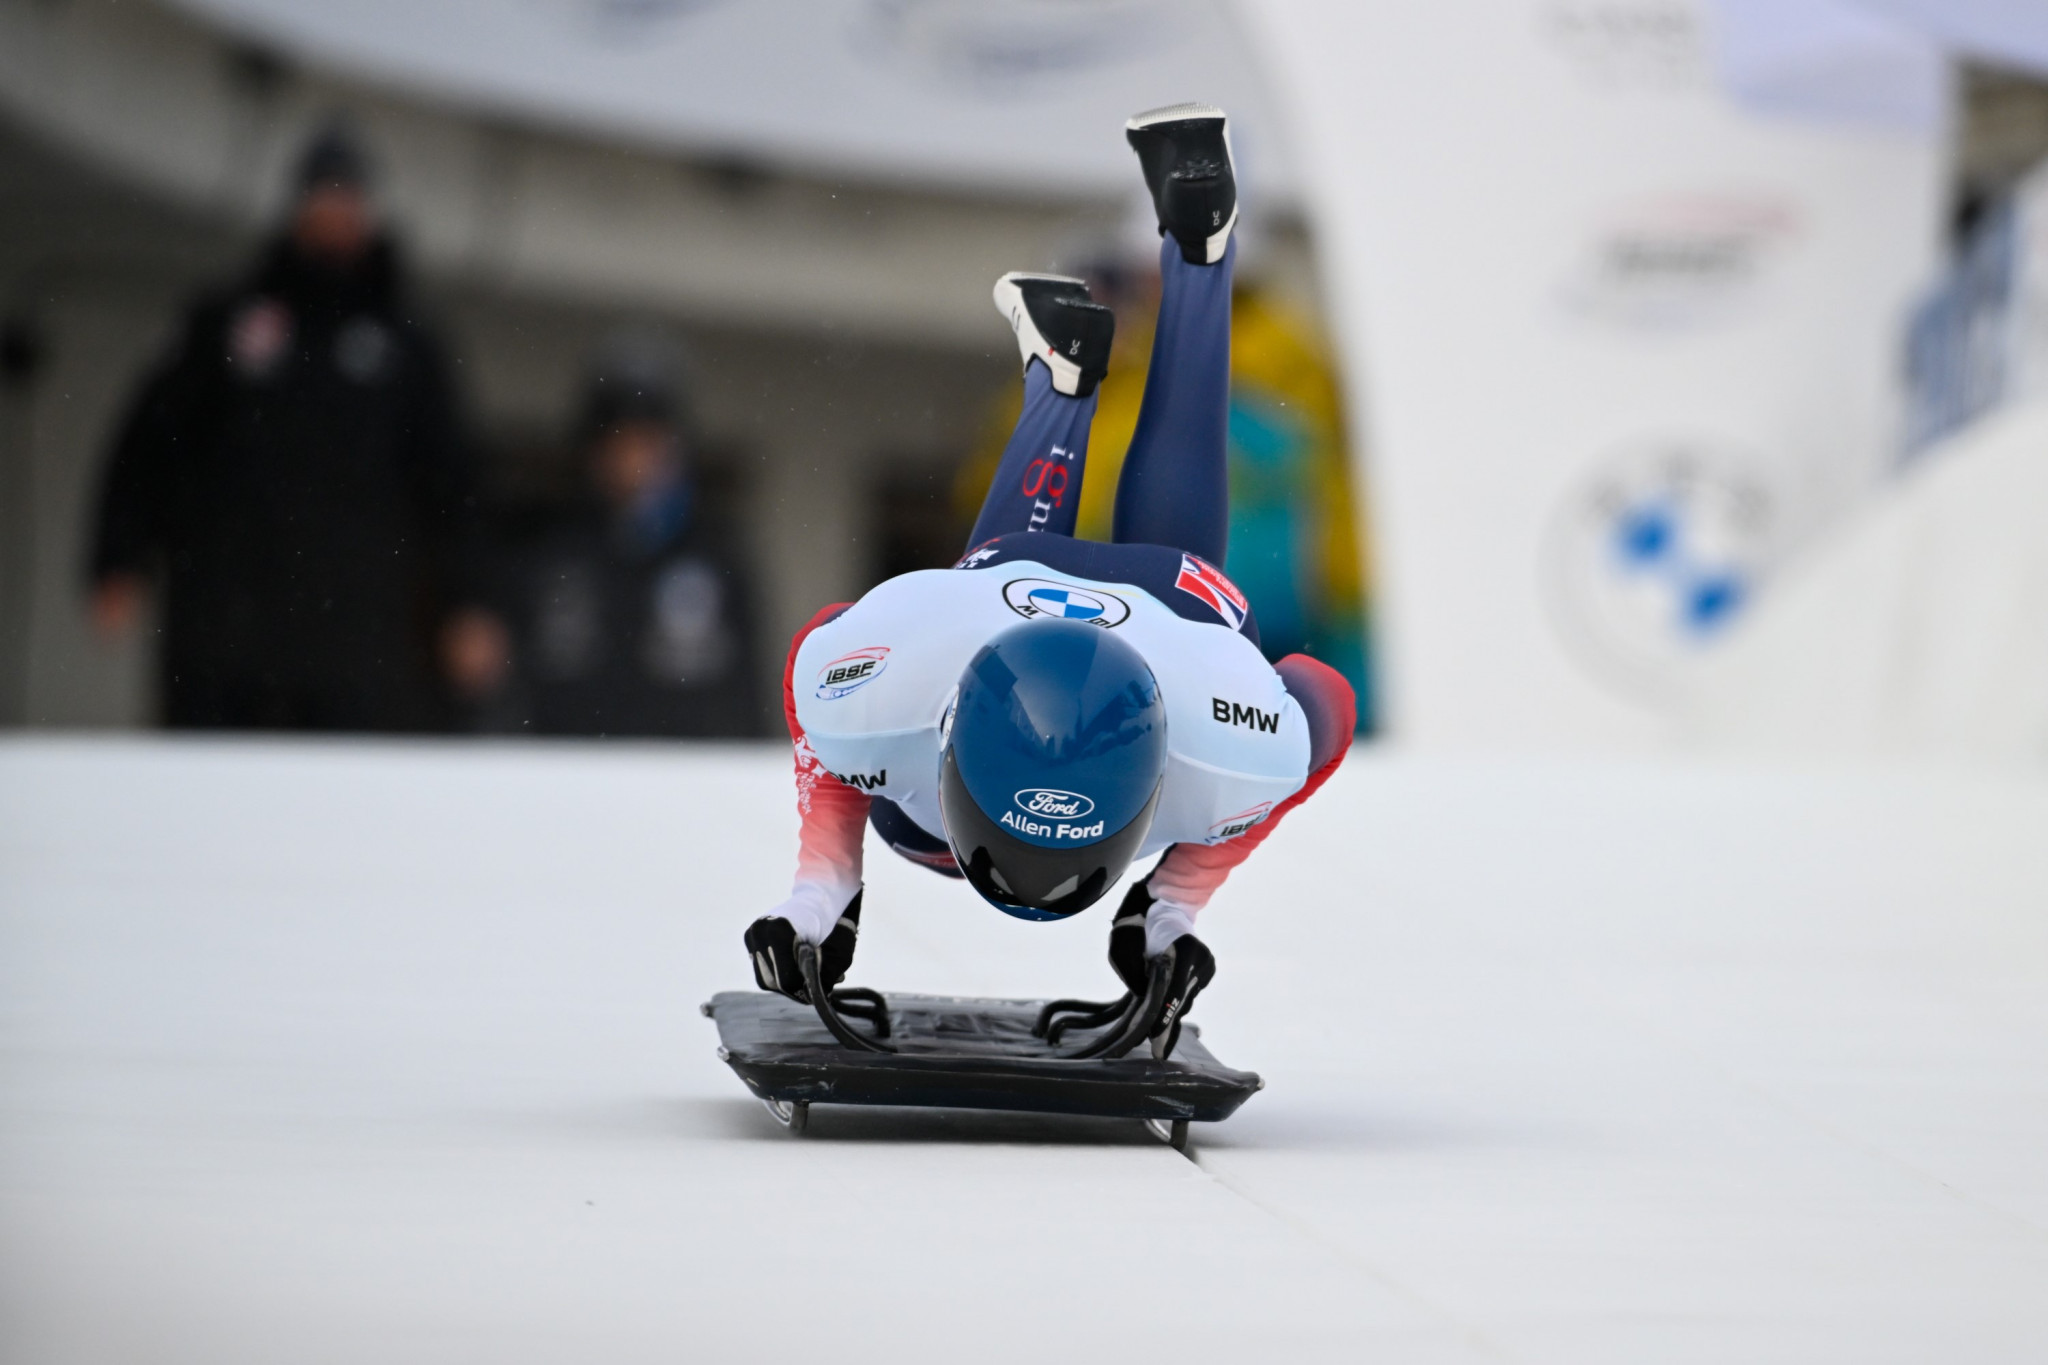 Kreher earns dramatic victory and Weston storms to gold at IBSF World Championships